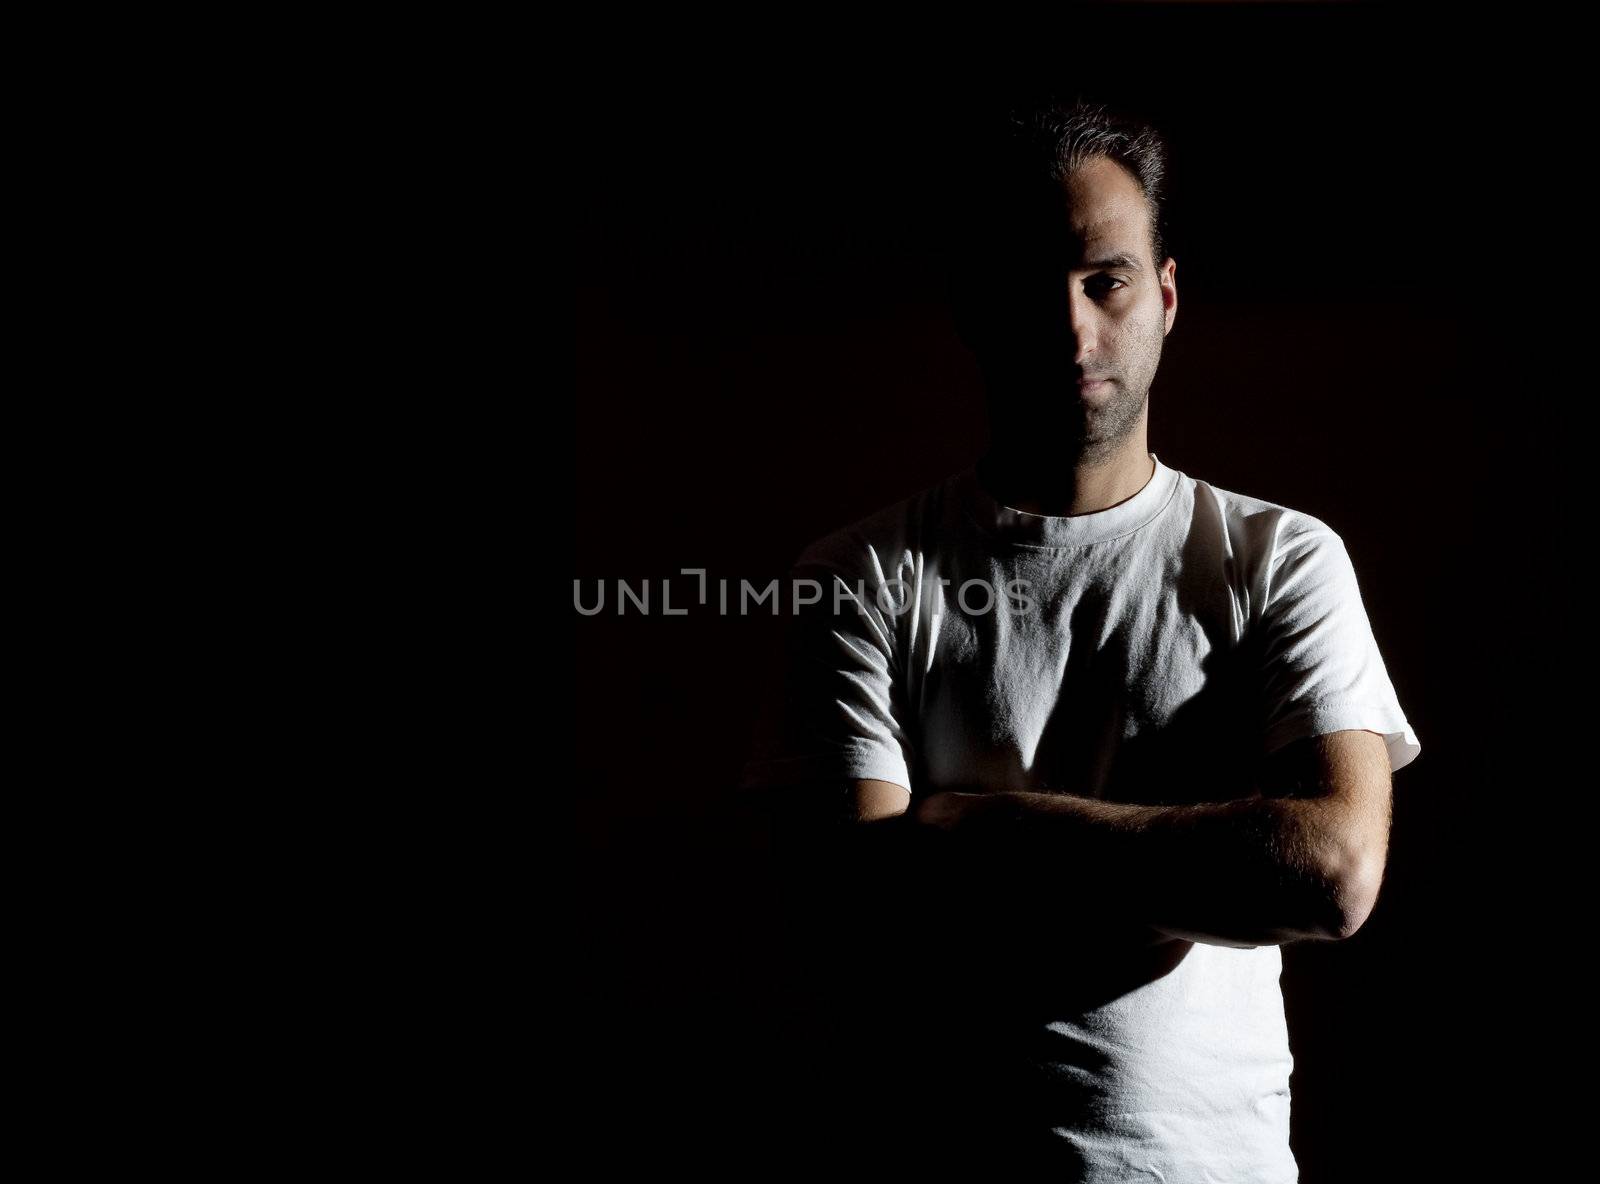 dark image of a no shaved dangerous looking guy in a rude pose